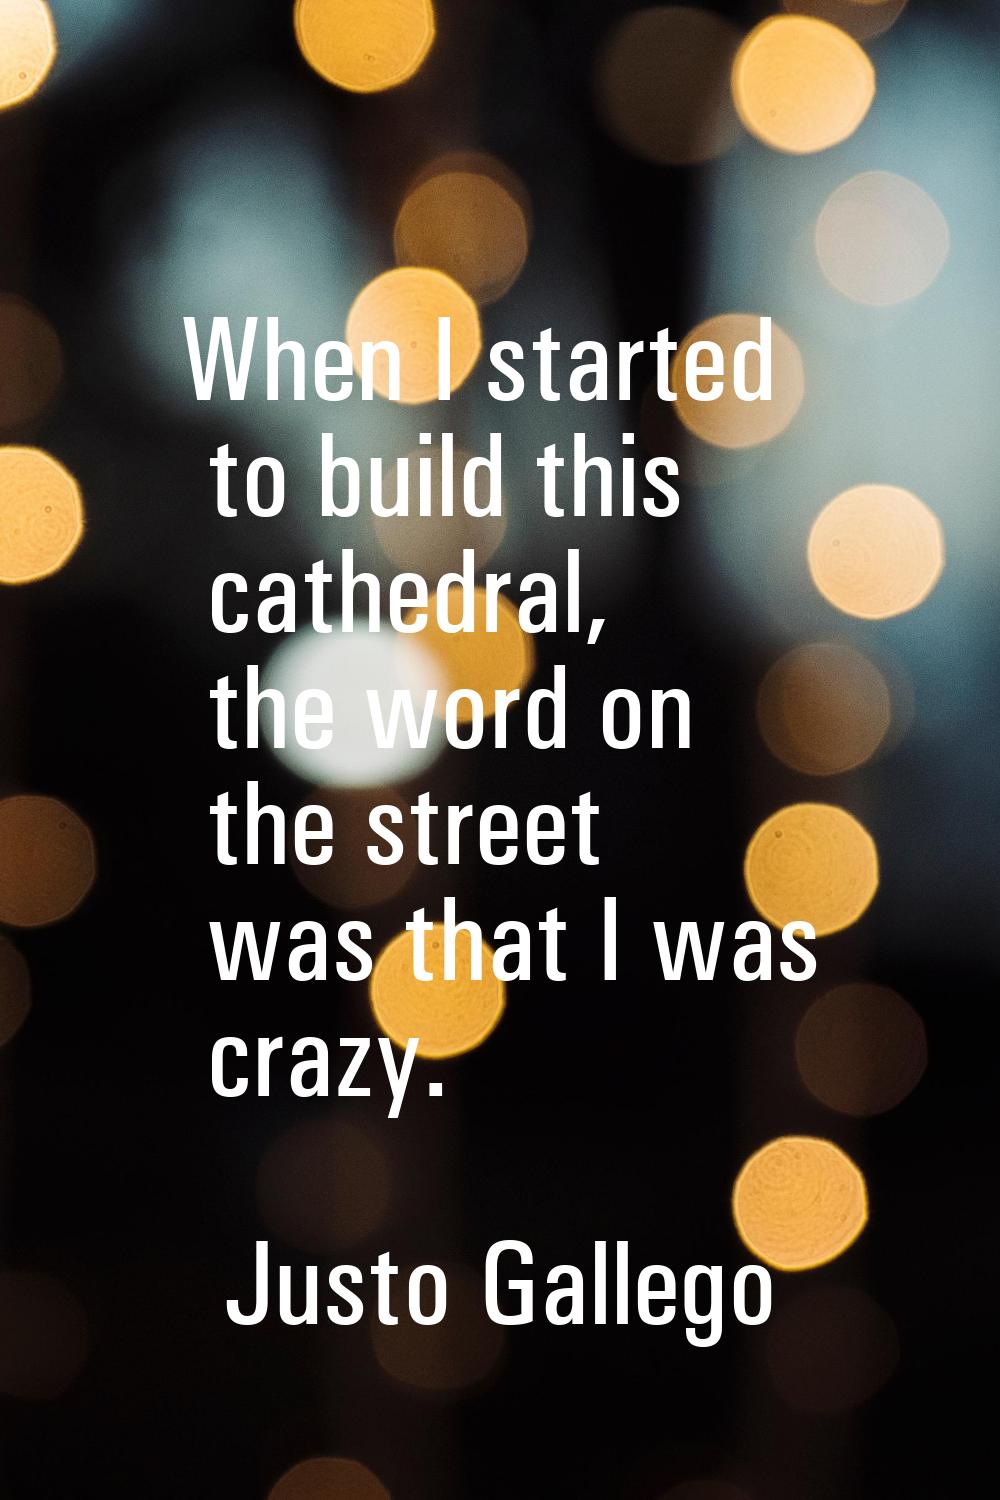 When I started to build this cathedral, the word on the street was that I was crazy.